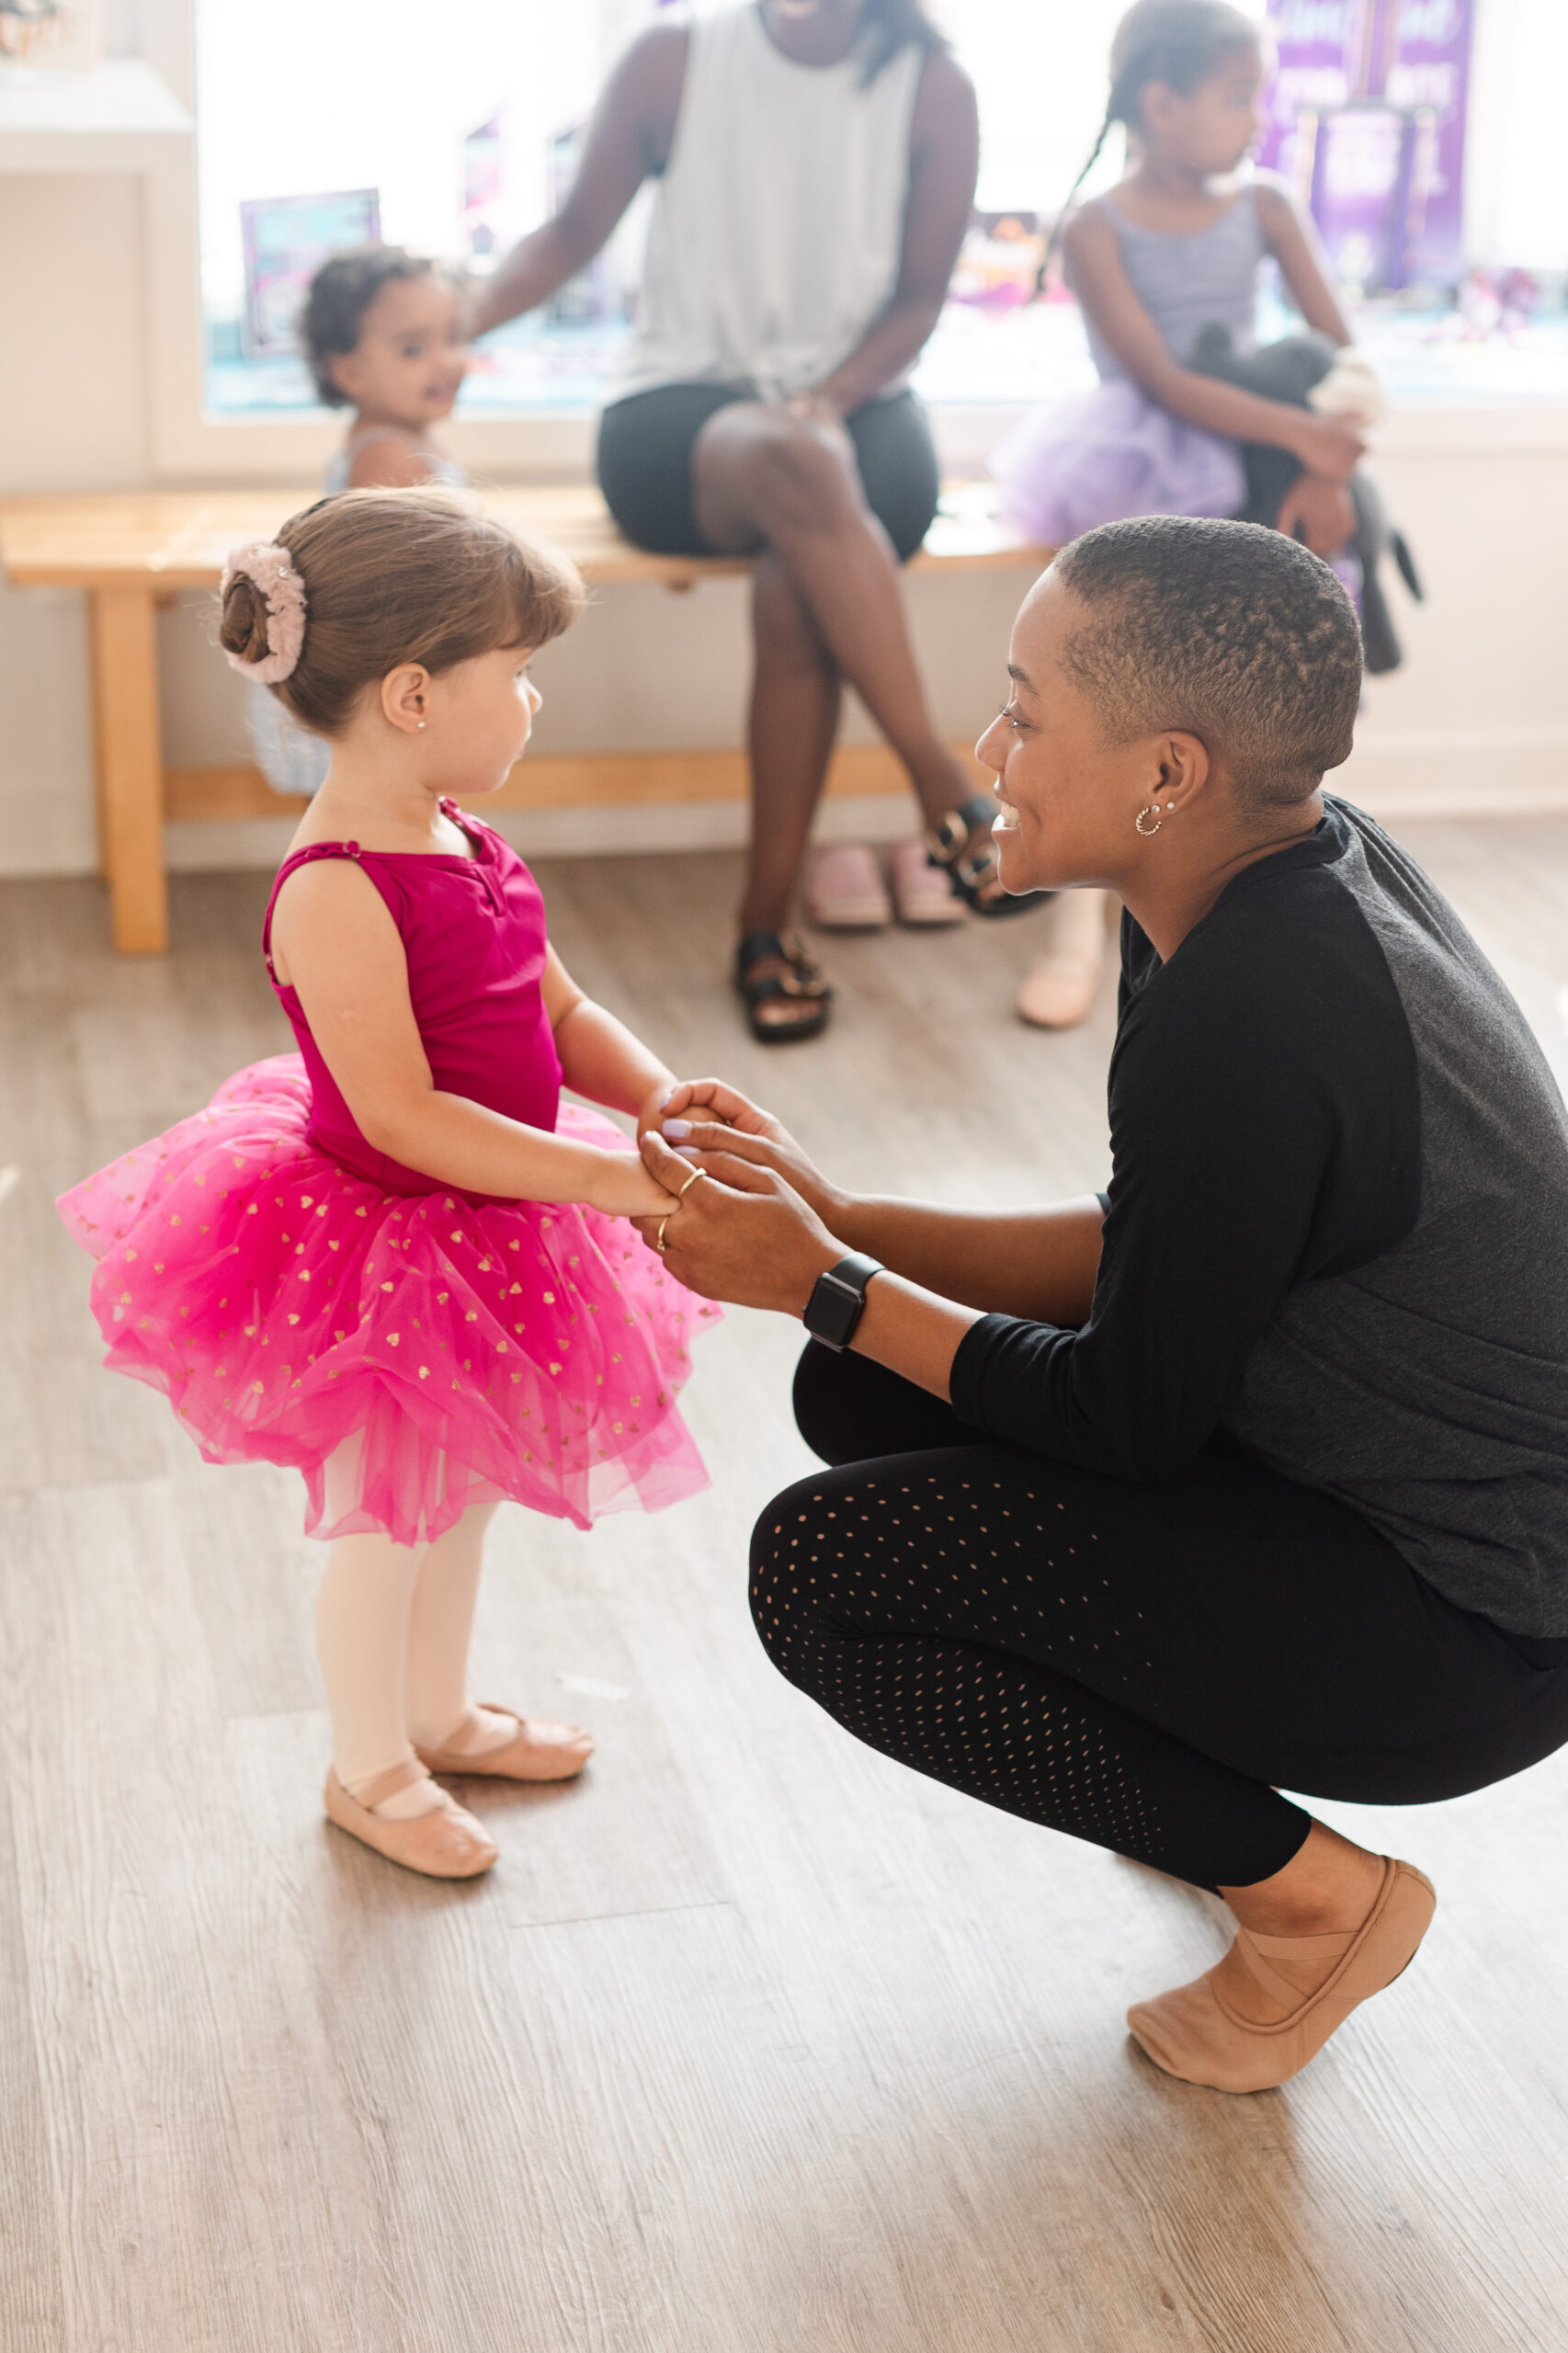 My Joie connecting with her young dance student